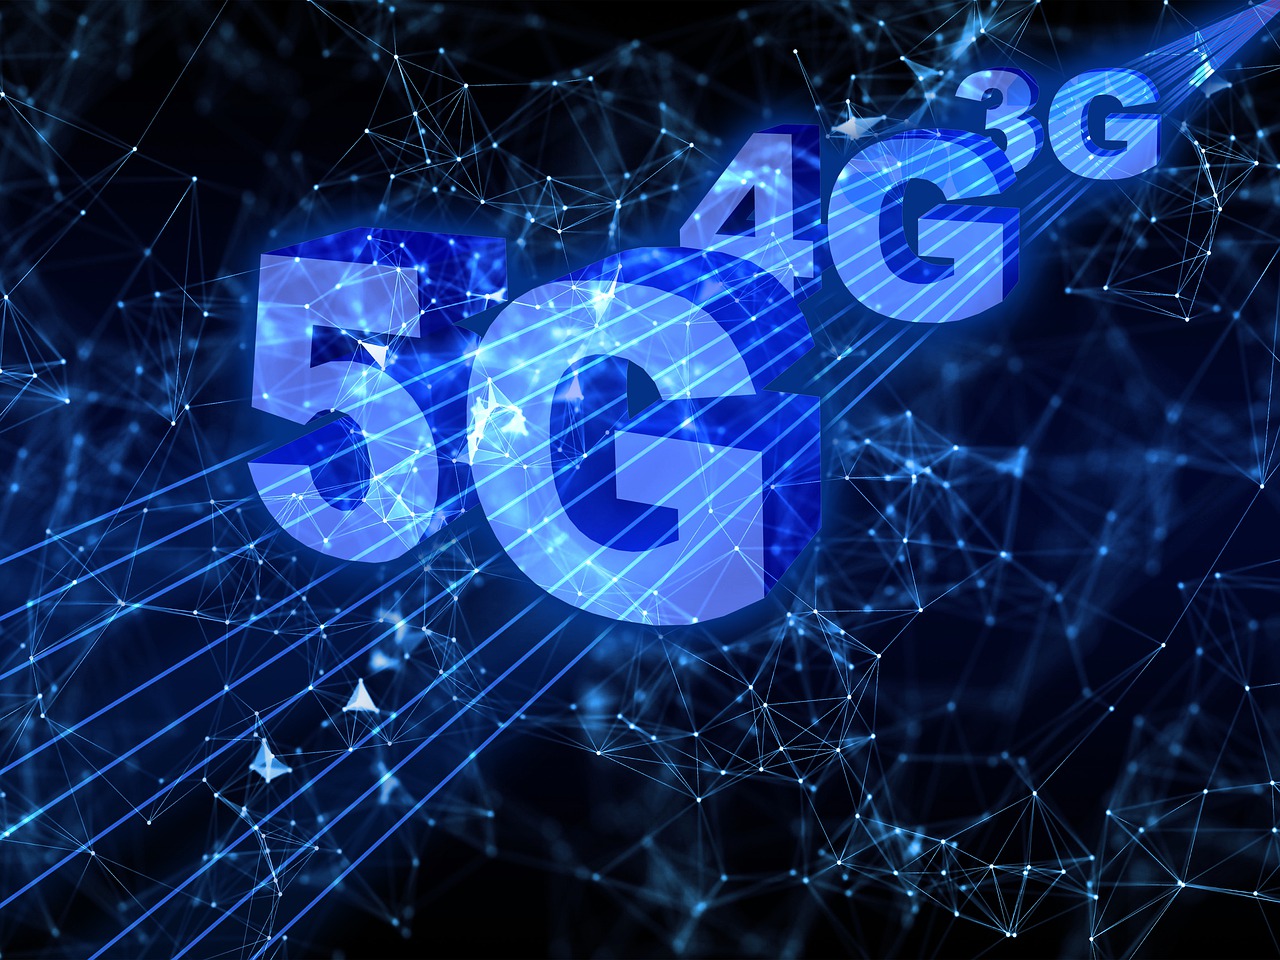 India’s Prime Minister To Launch 5G Services On October 1st